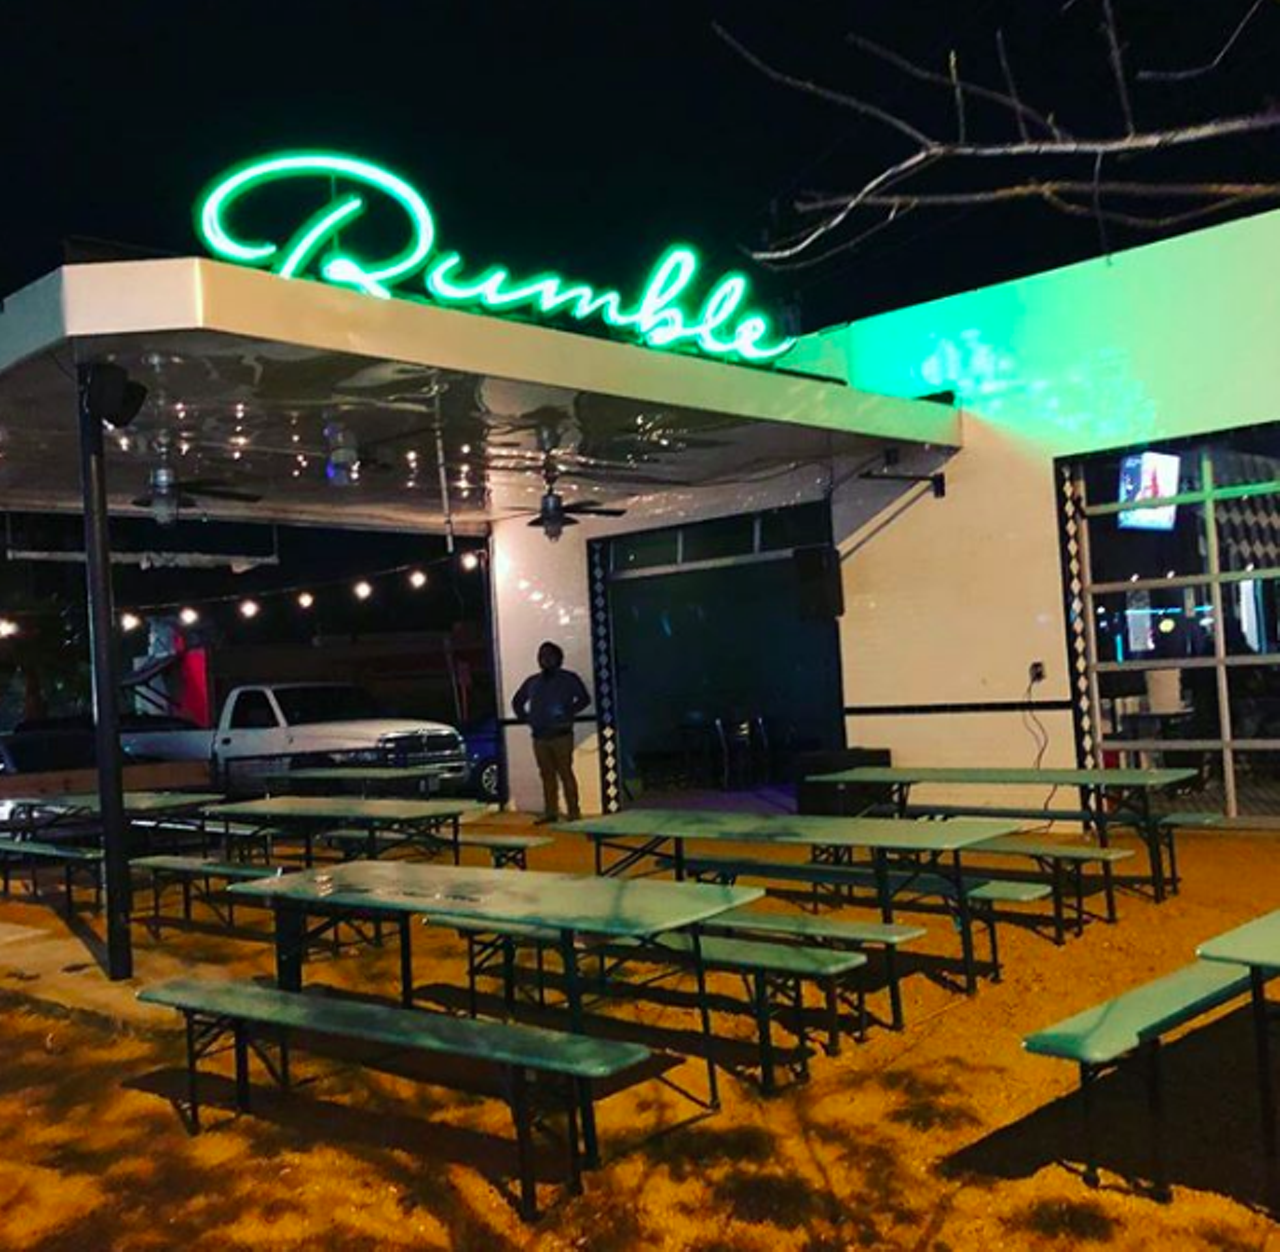 Rumble
Masks Required
2410 N St Mary's St, (210) 885-3925, rumblesatx.com
Beer, mixed drinks, frozen drinks – you can have it all at Rumble. And the best news of all is that you can enjoy the booze and patio vibes with your pup by your side.
Photo via Instagram / oteroadaniel